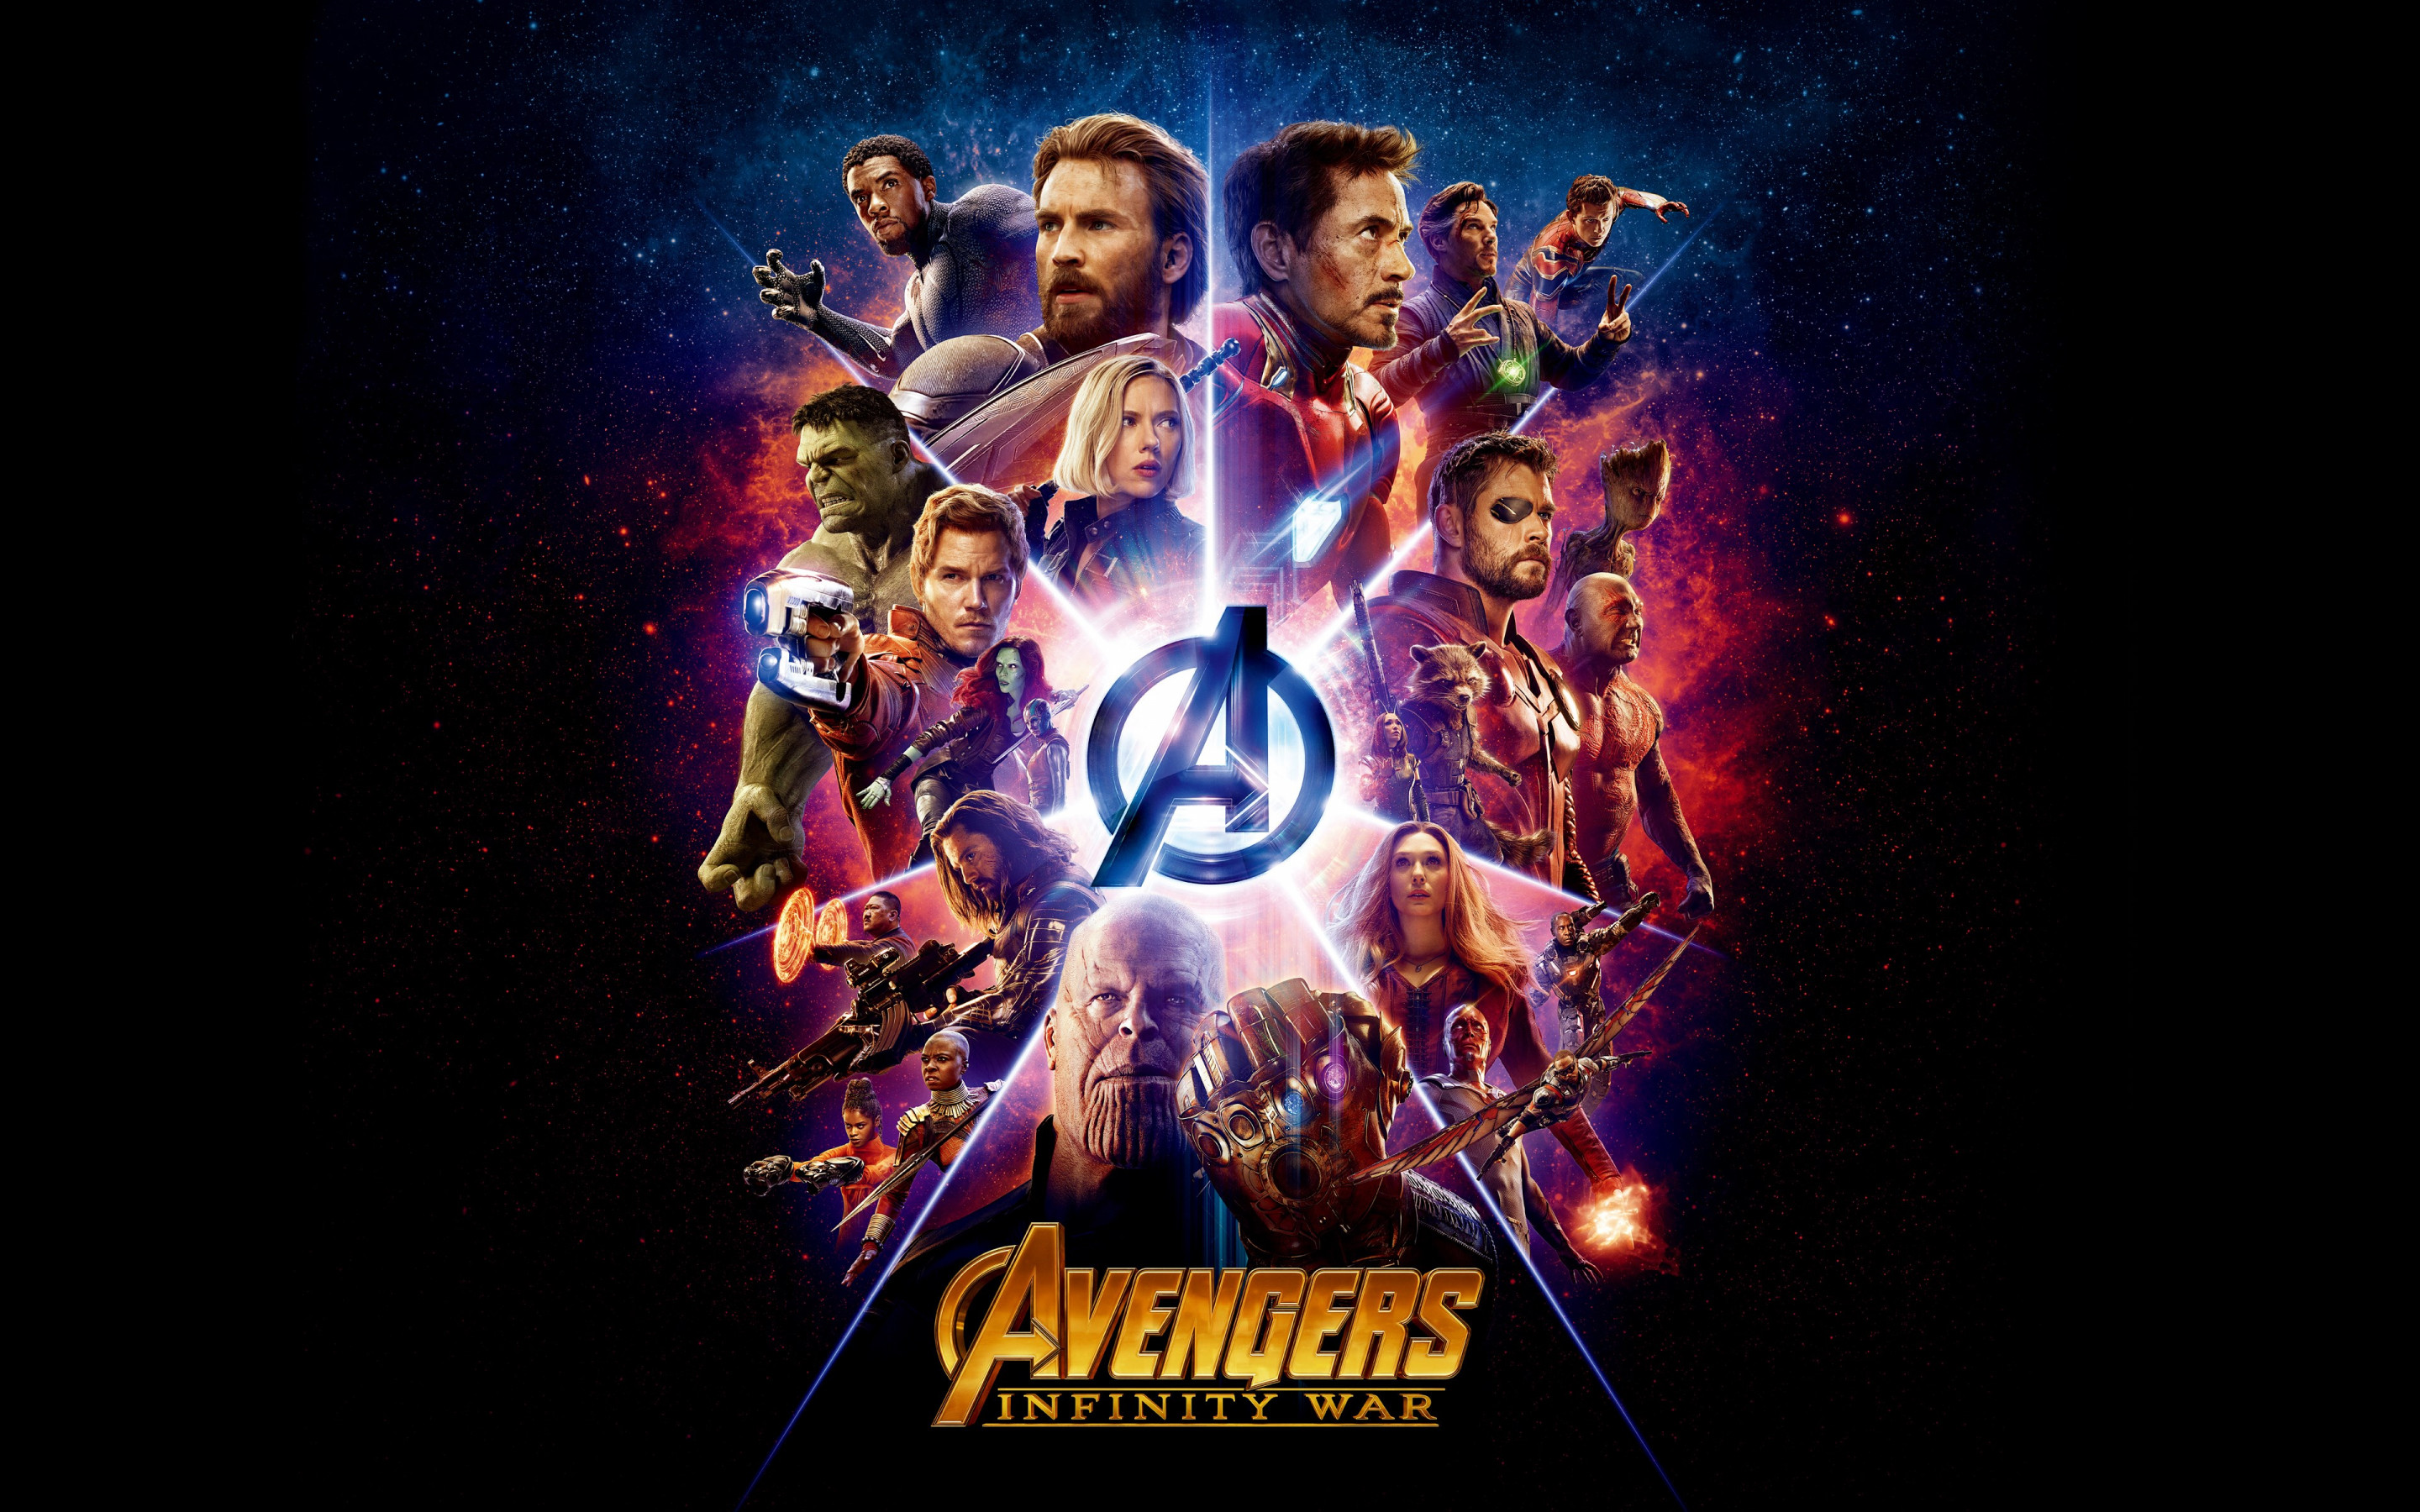 All the heroes from Avengers: Infinity War wallpaper 2880x1800